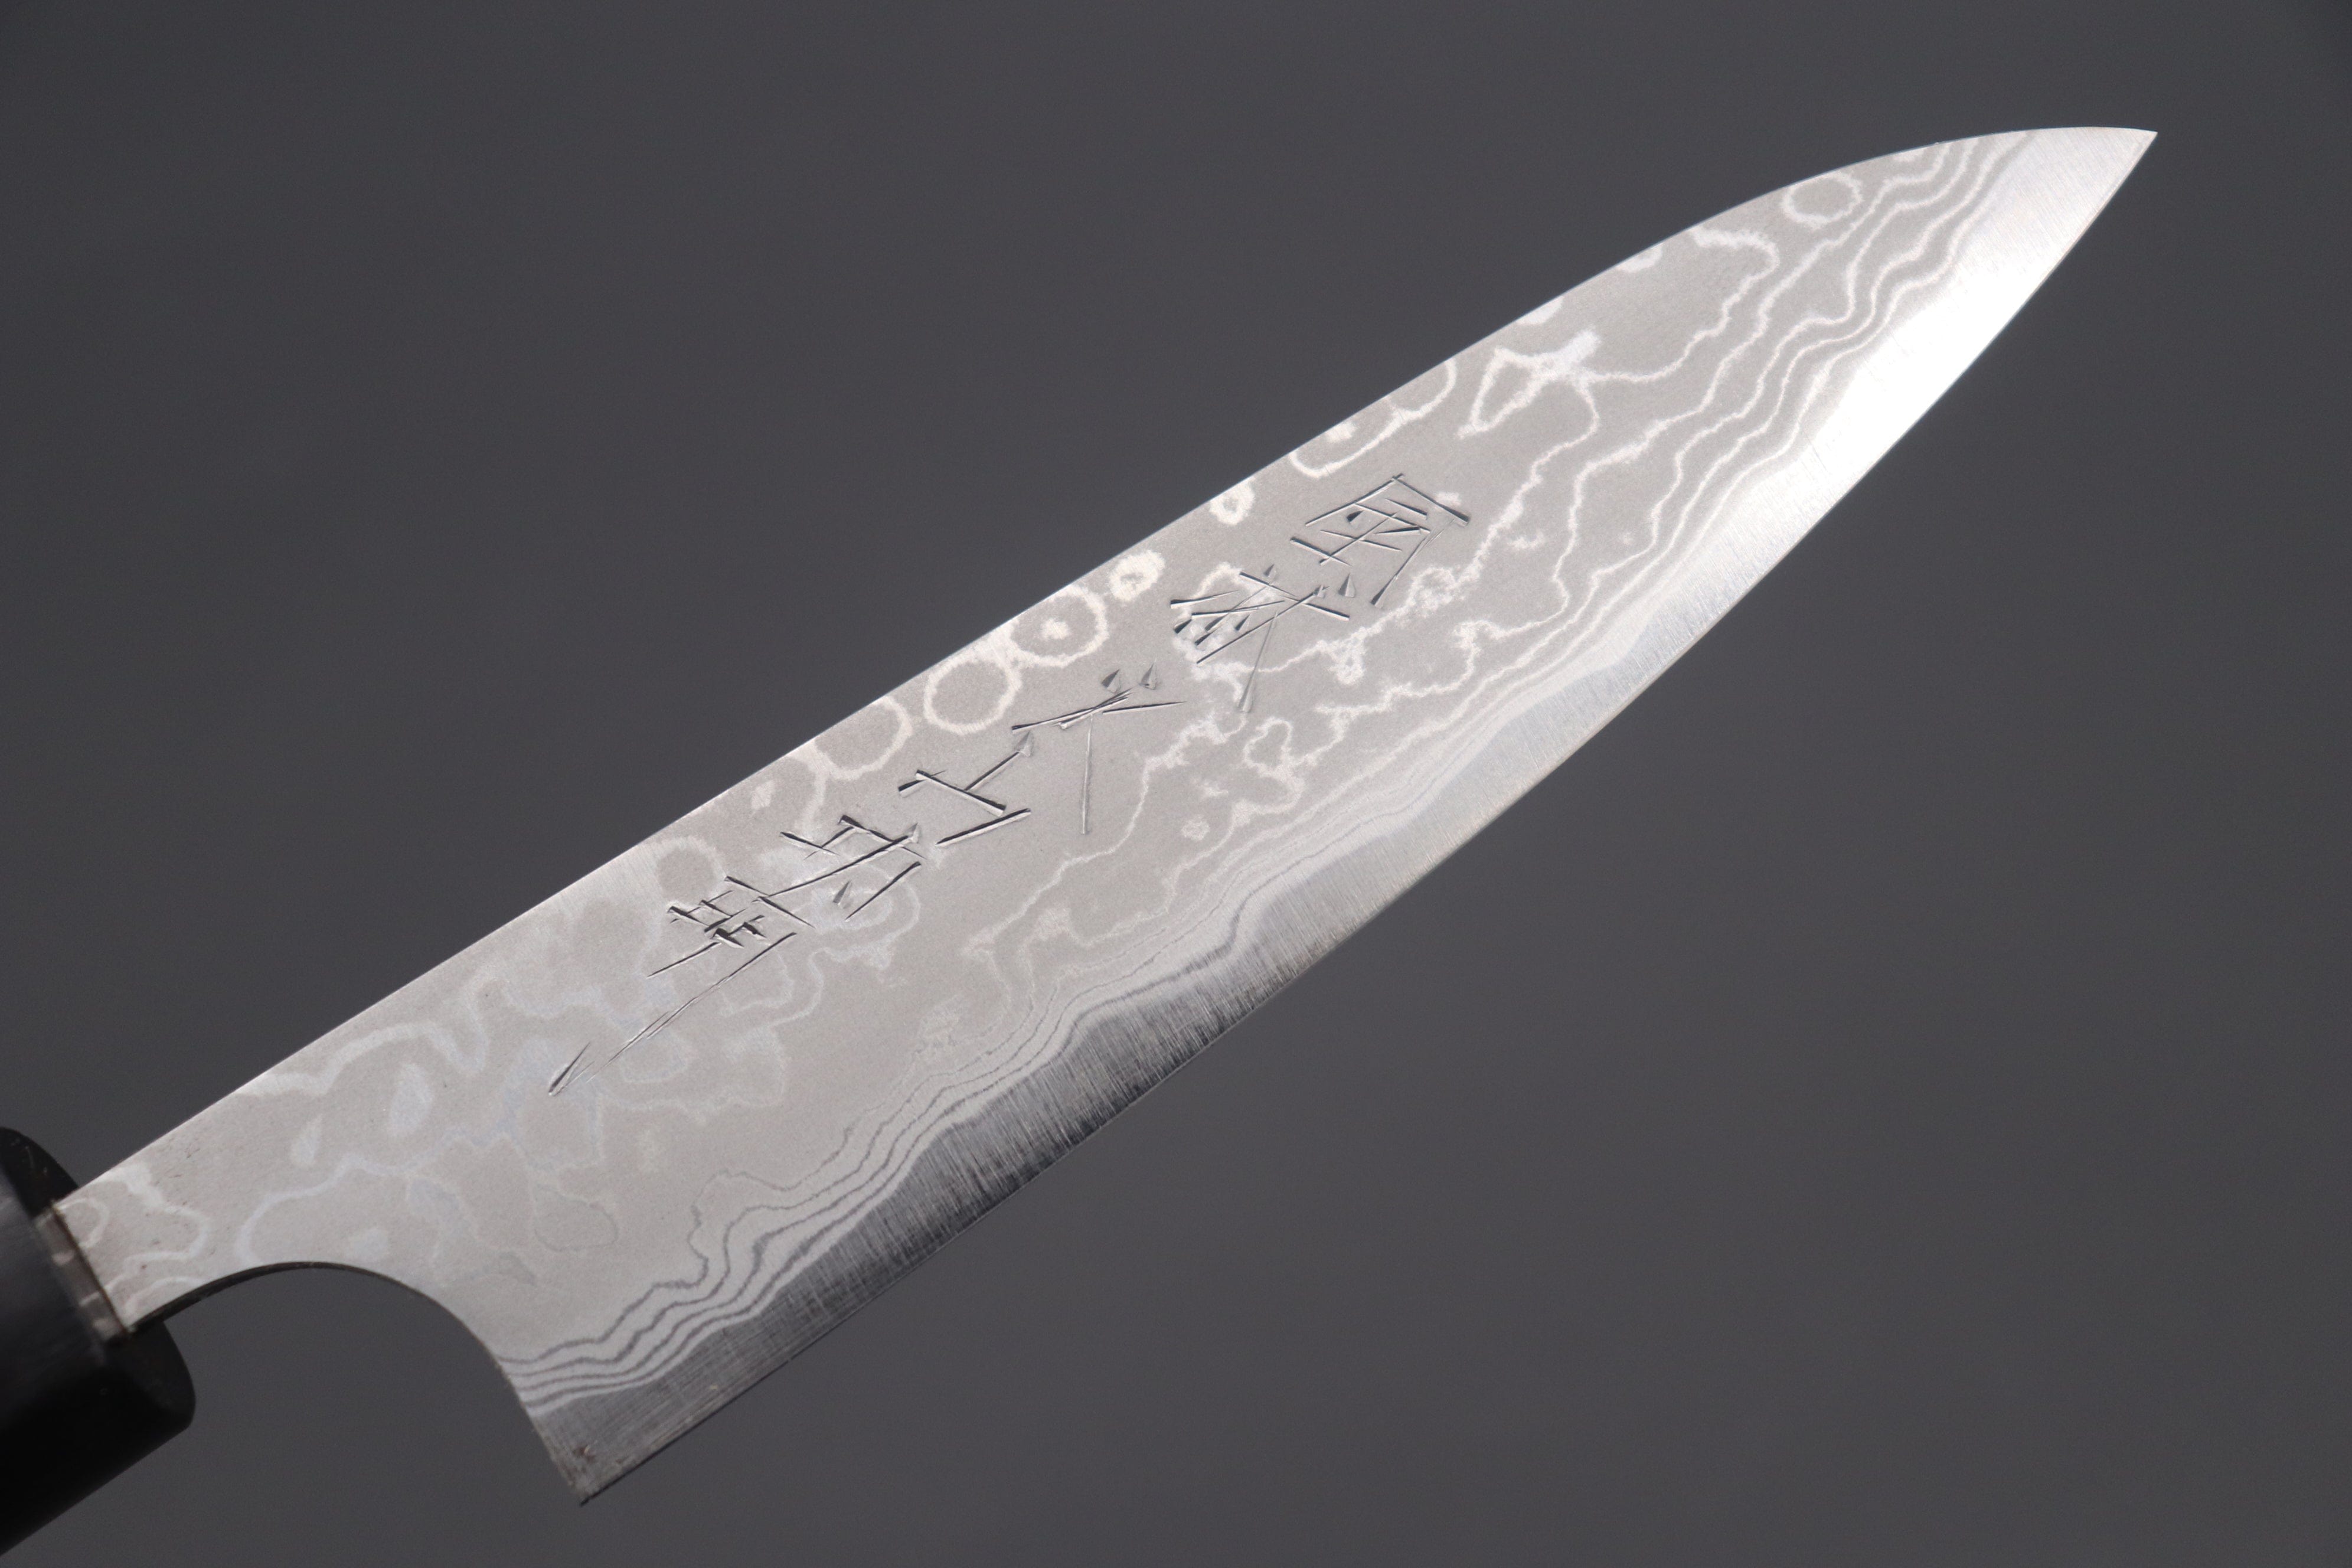 Care and maintenance of Damascus steel